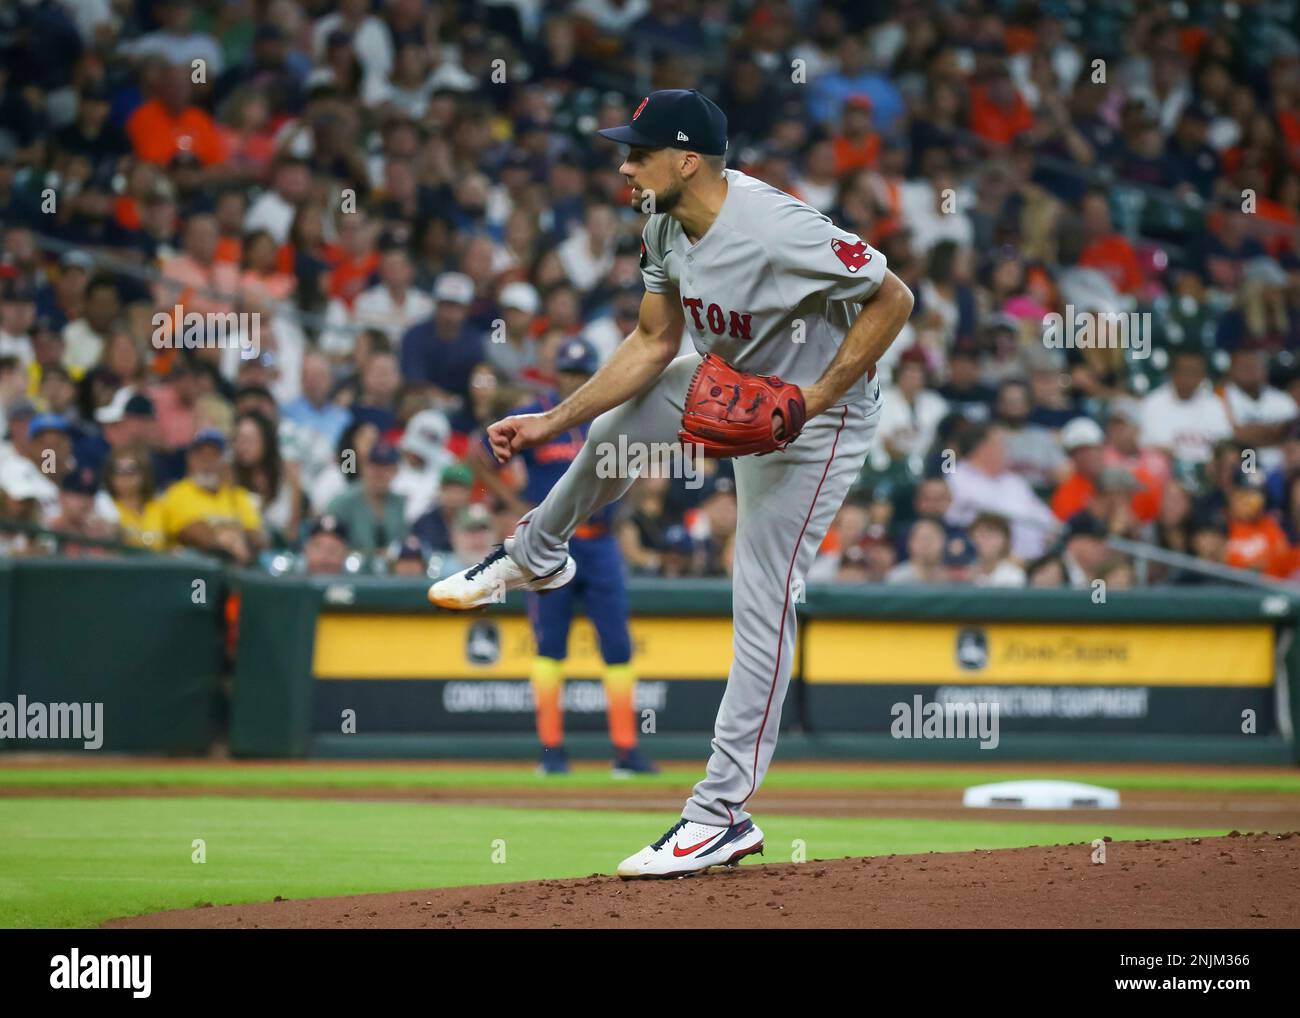 July 1] Nathan Eovaldi, the pitch info for all the pitches 